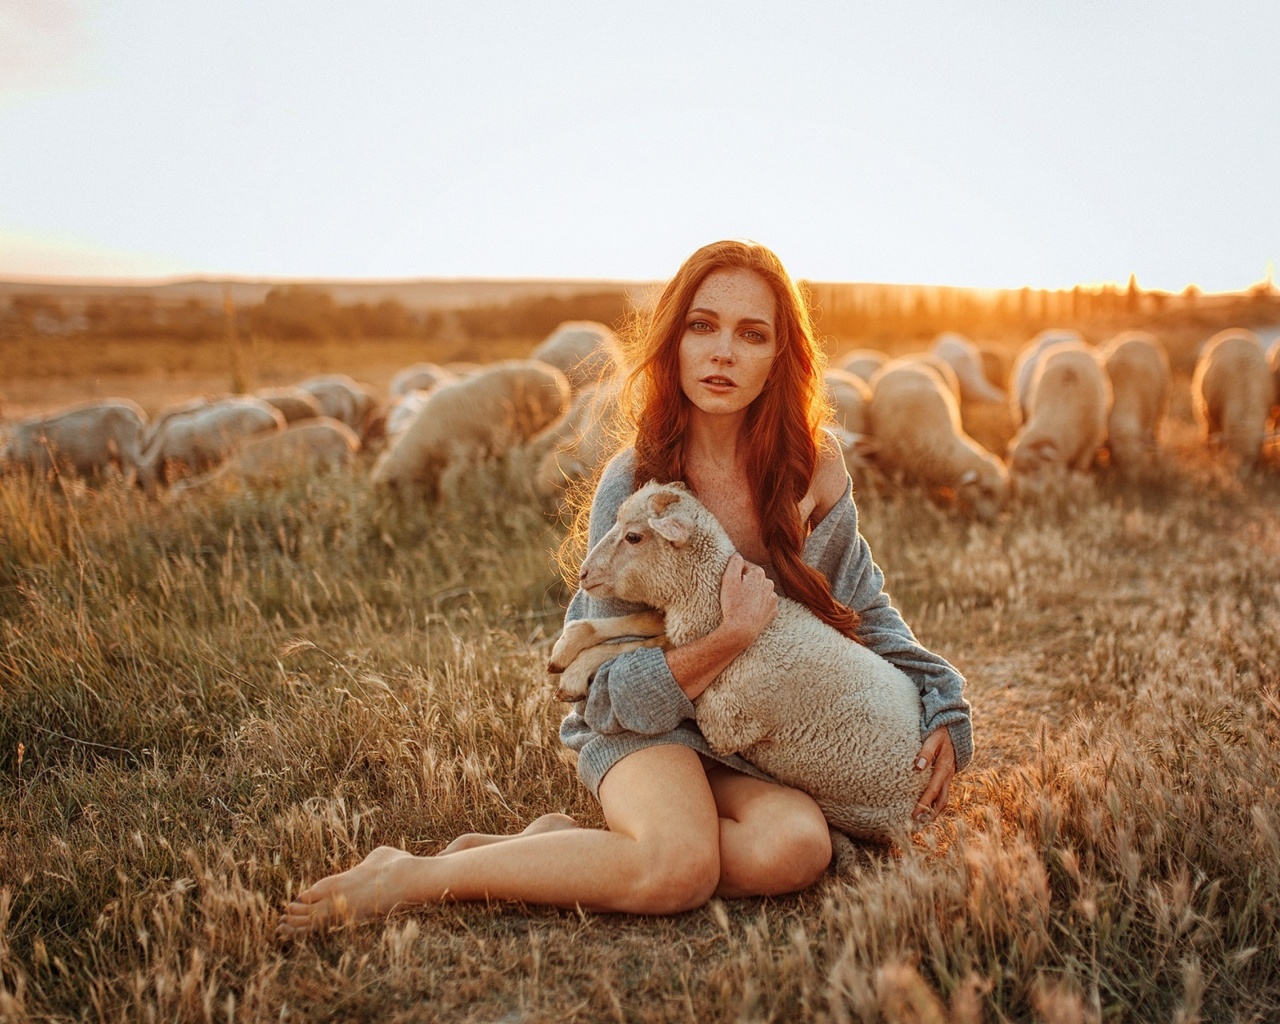 Girl with Sheep wallpaper 1280x1024